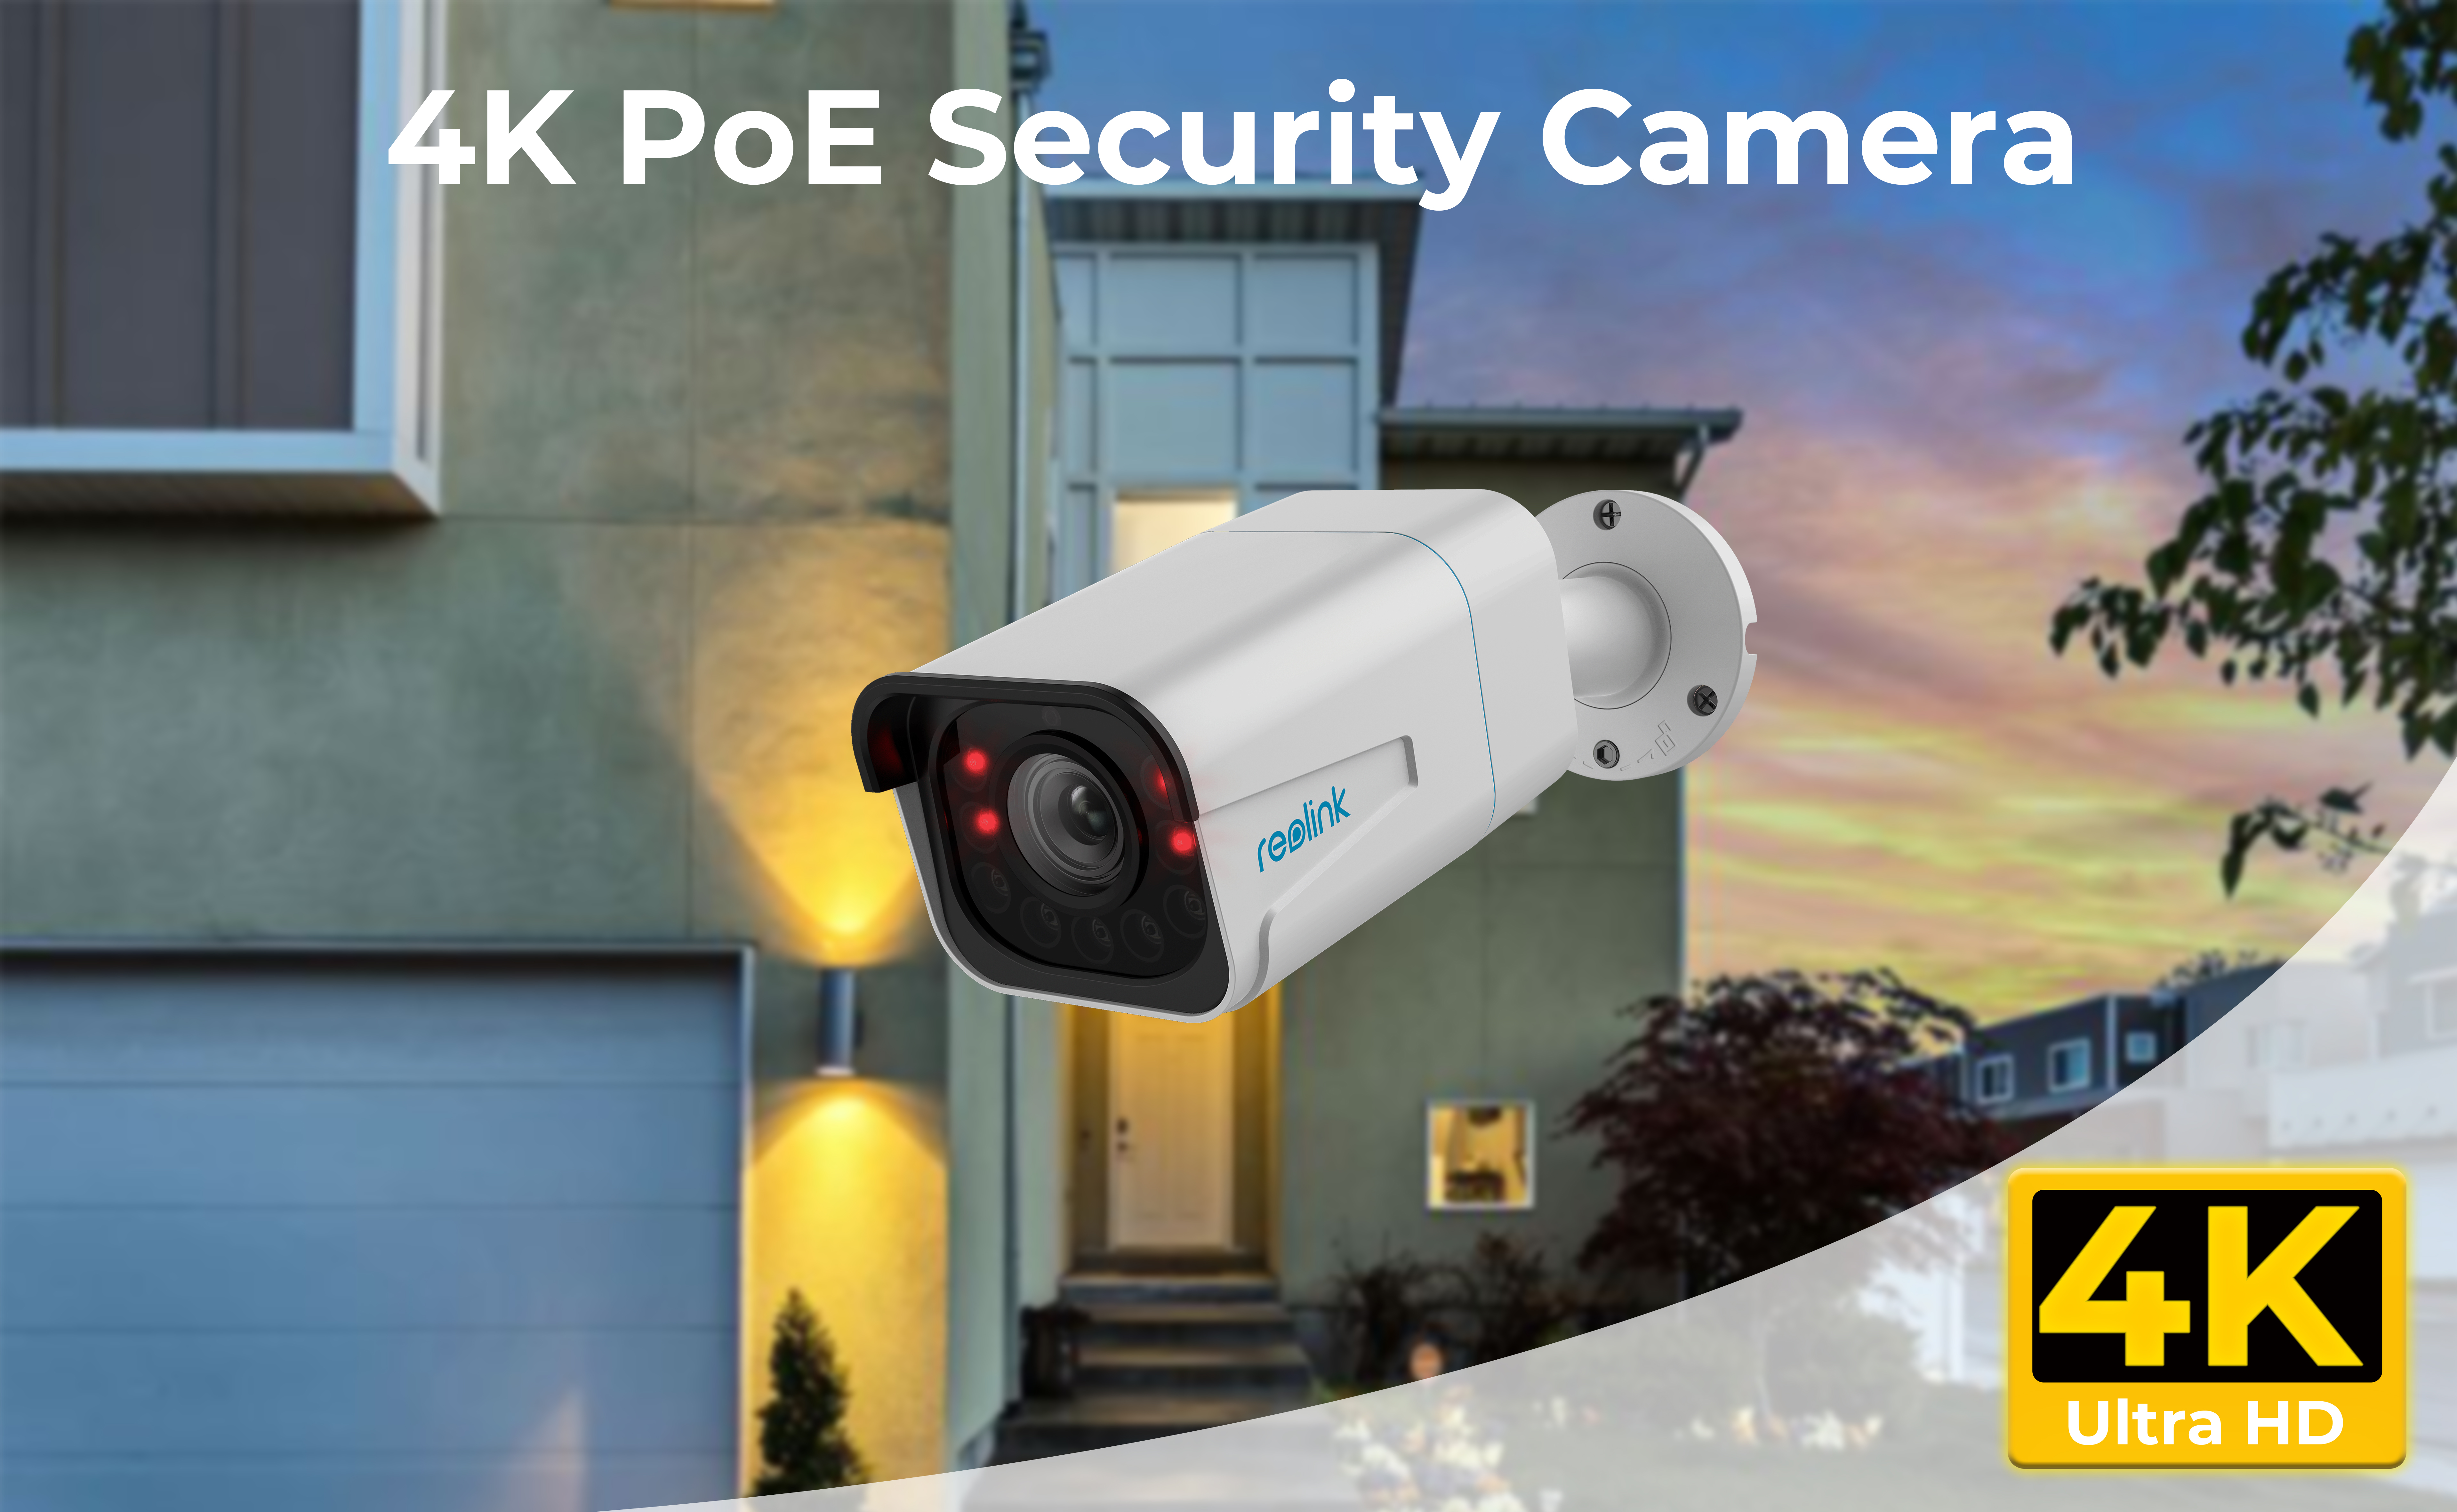 4K PoE Cameras: Top 5 Things to Know to Be Smart Buyers